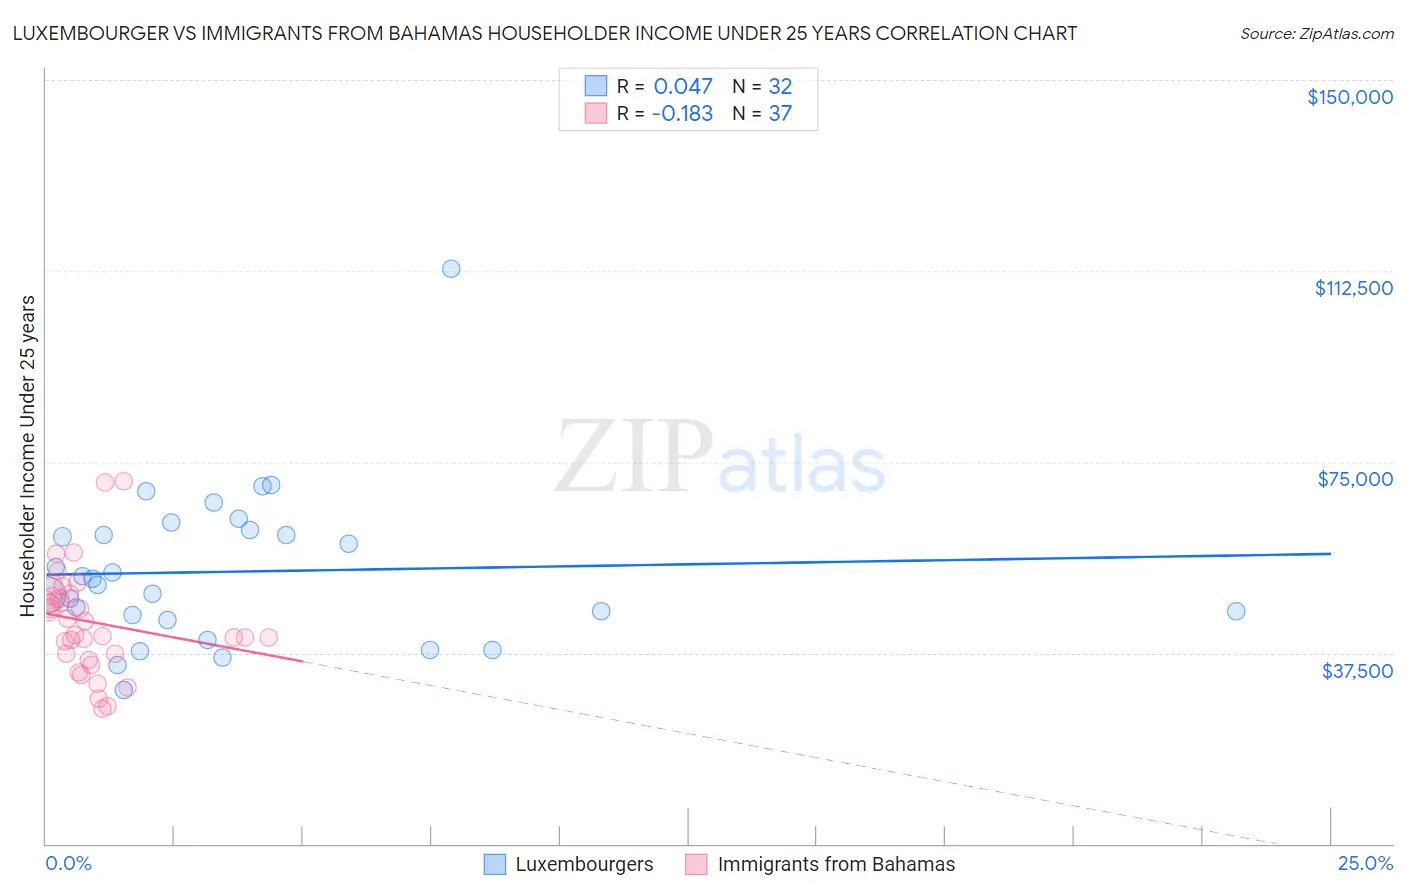 Luxembourger vs Immigrants from Bahamas Householder Income Under 25 years